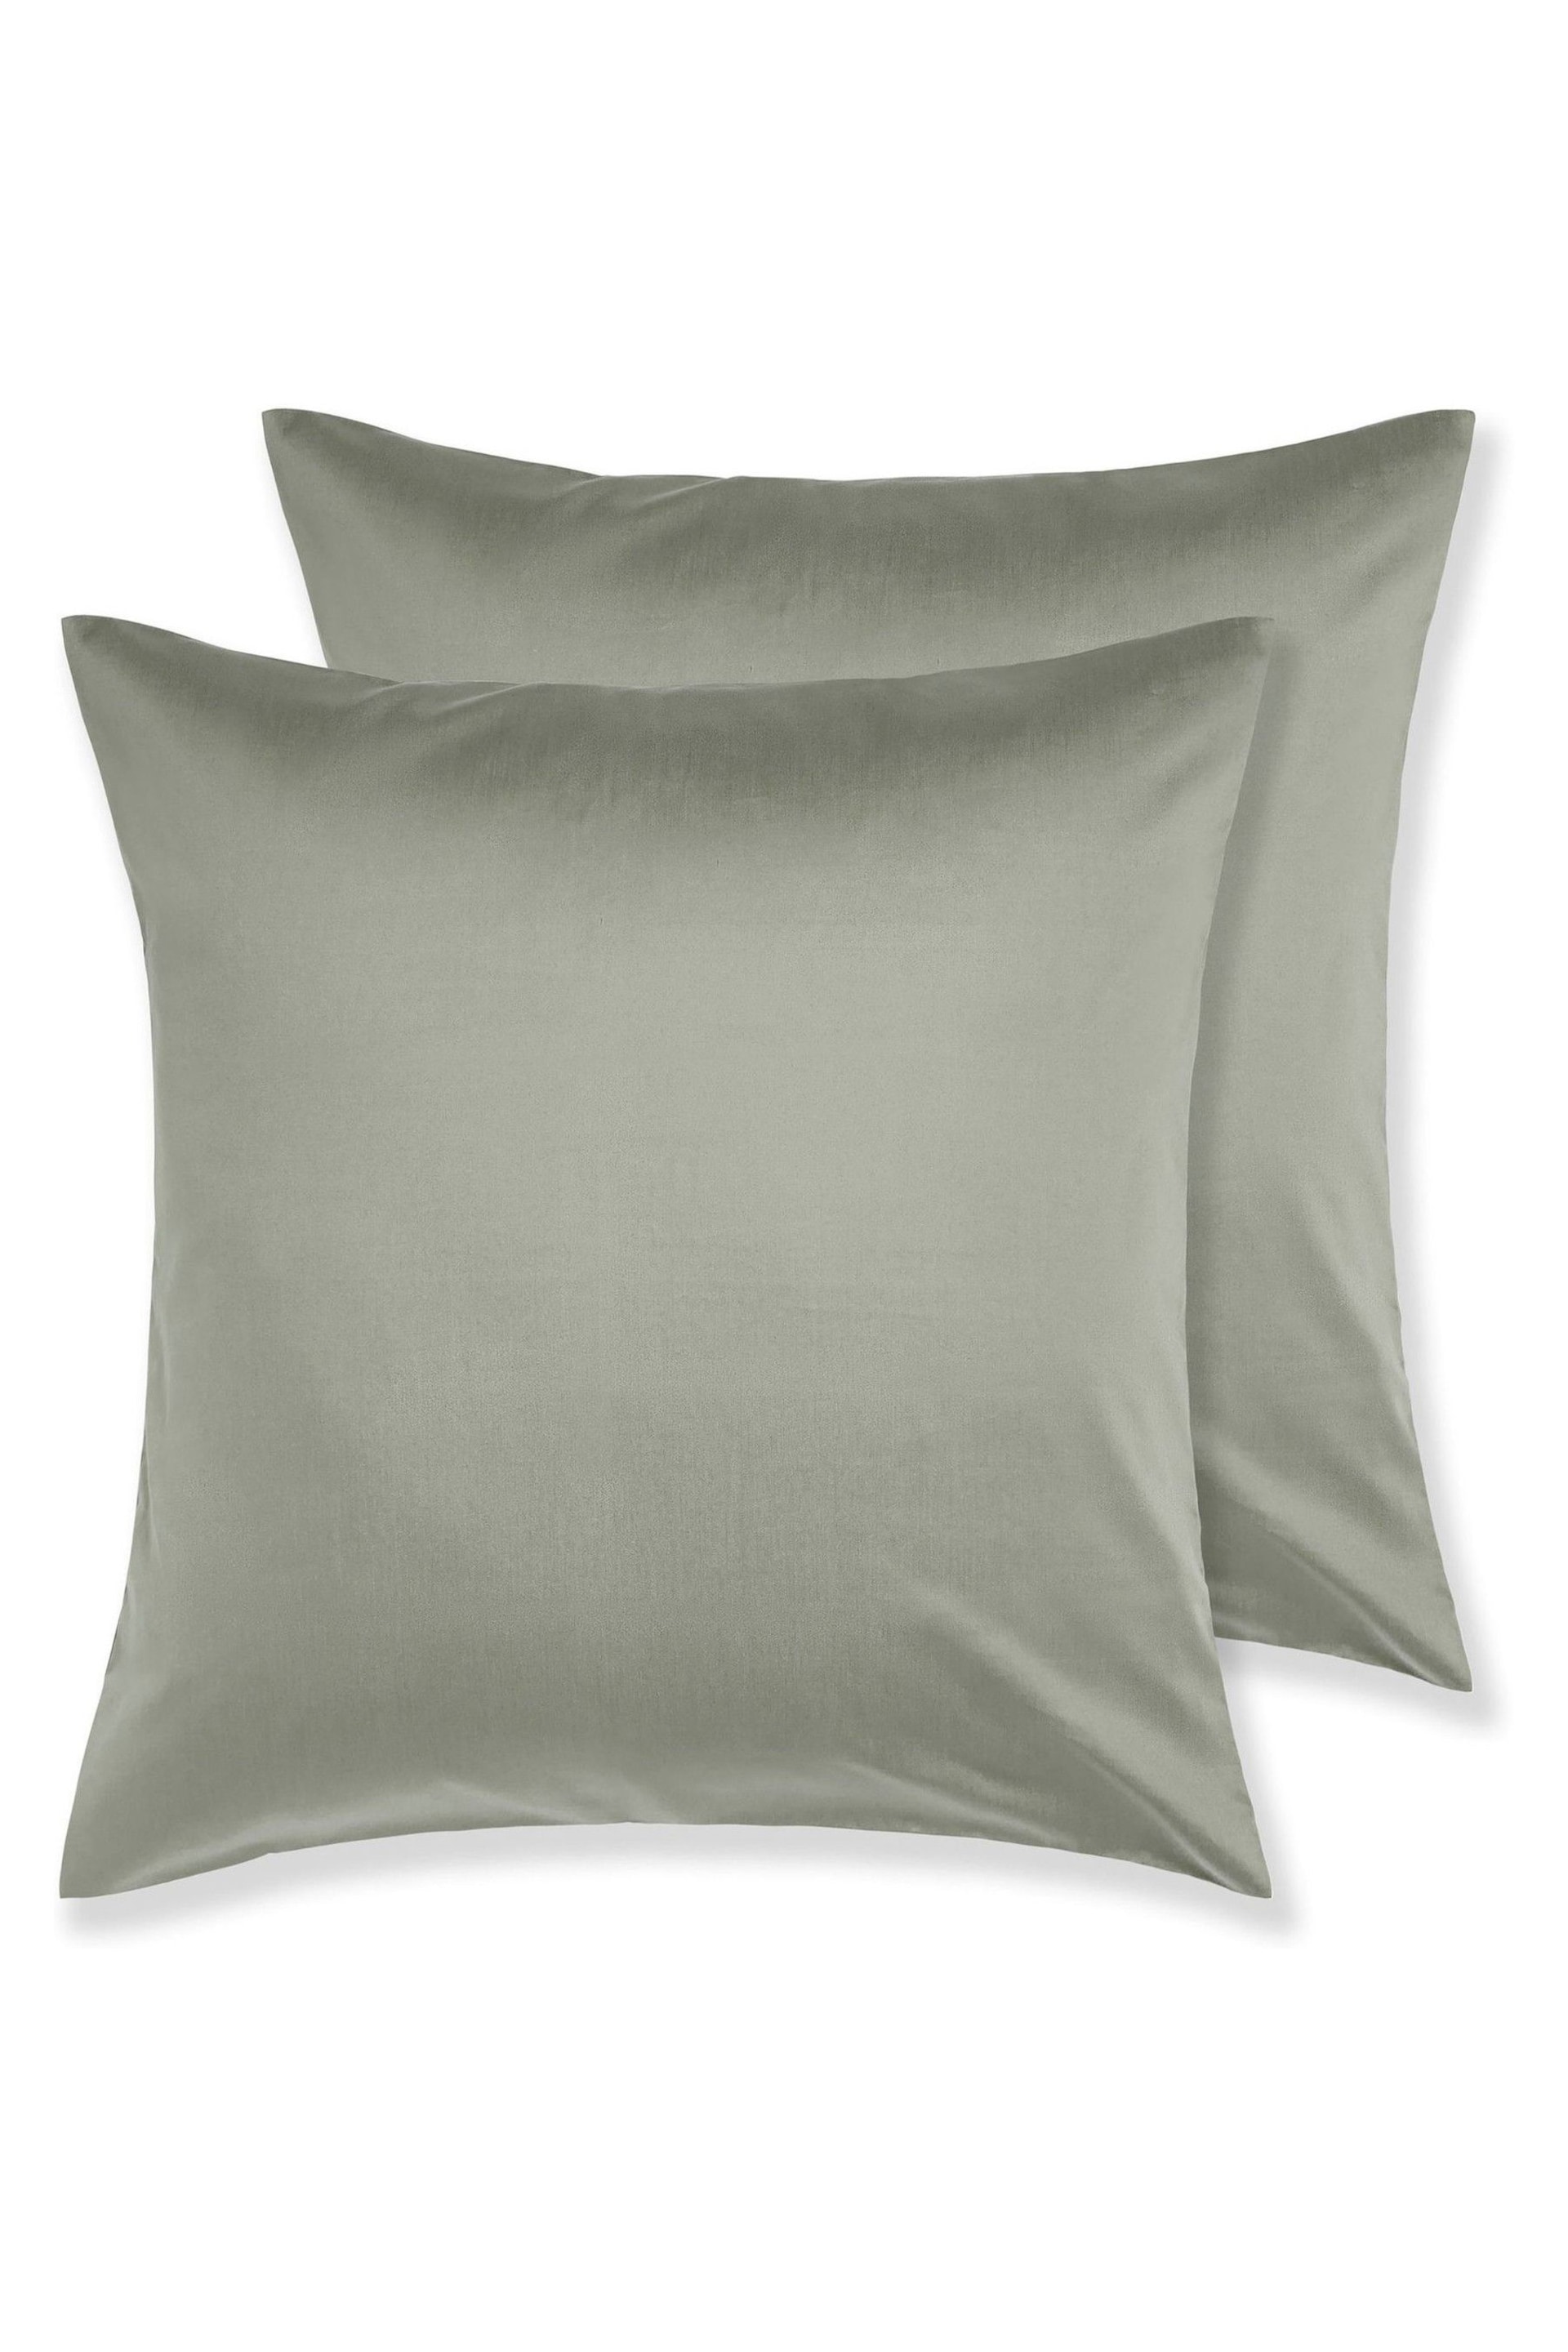 Bedfolk Set of 2 Green Luxe Cotton Square Pillowcases - Image 1 of 3